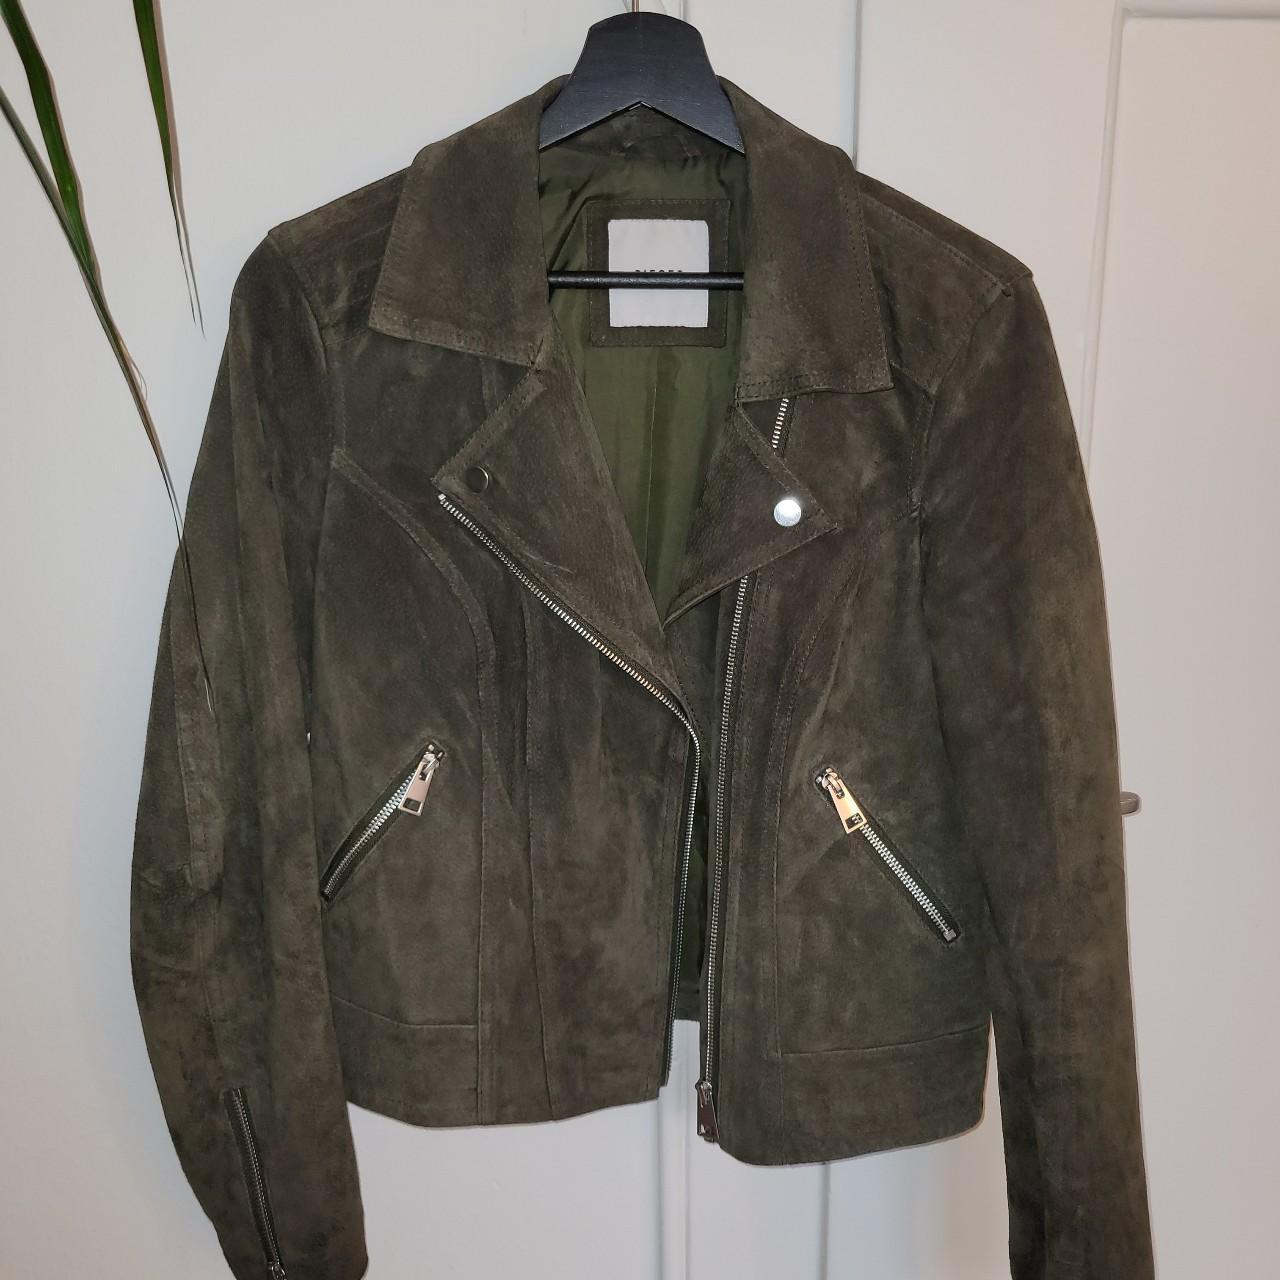 Real leather jacket in green from pieces - Depop